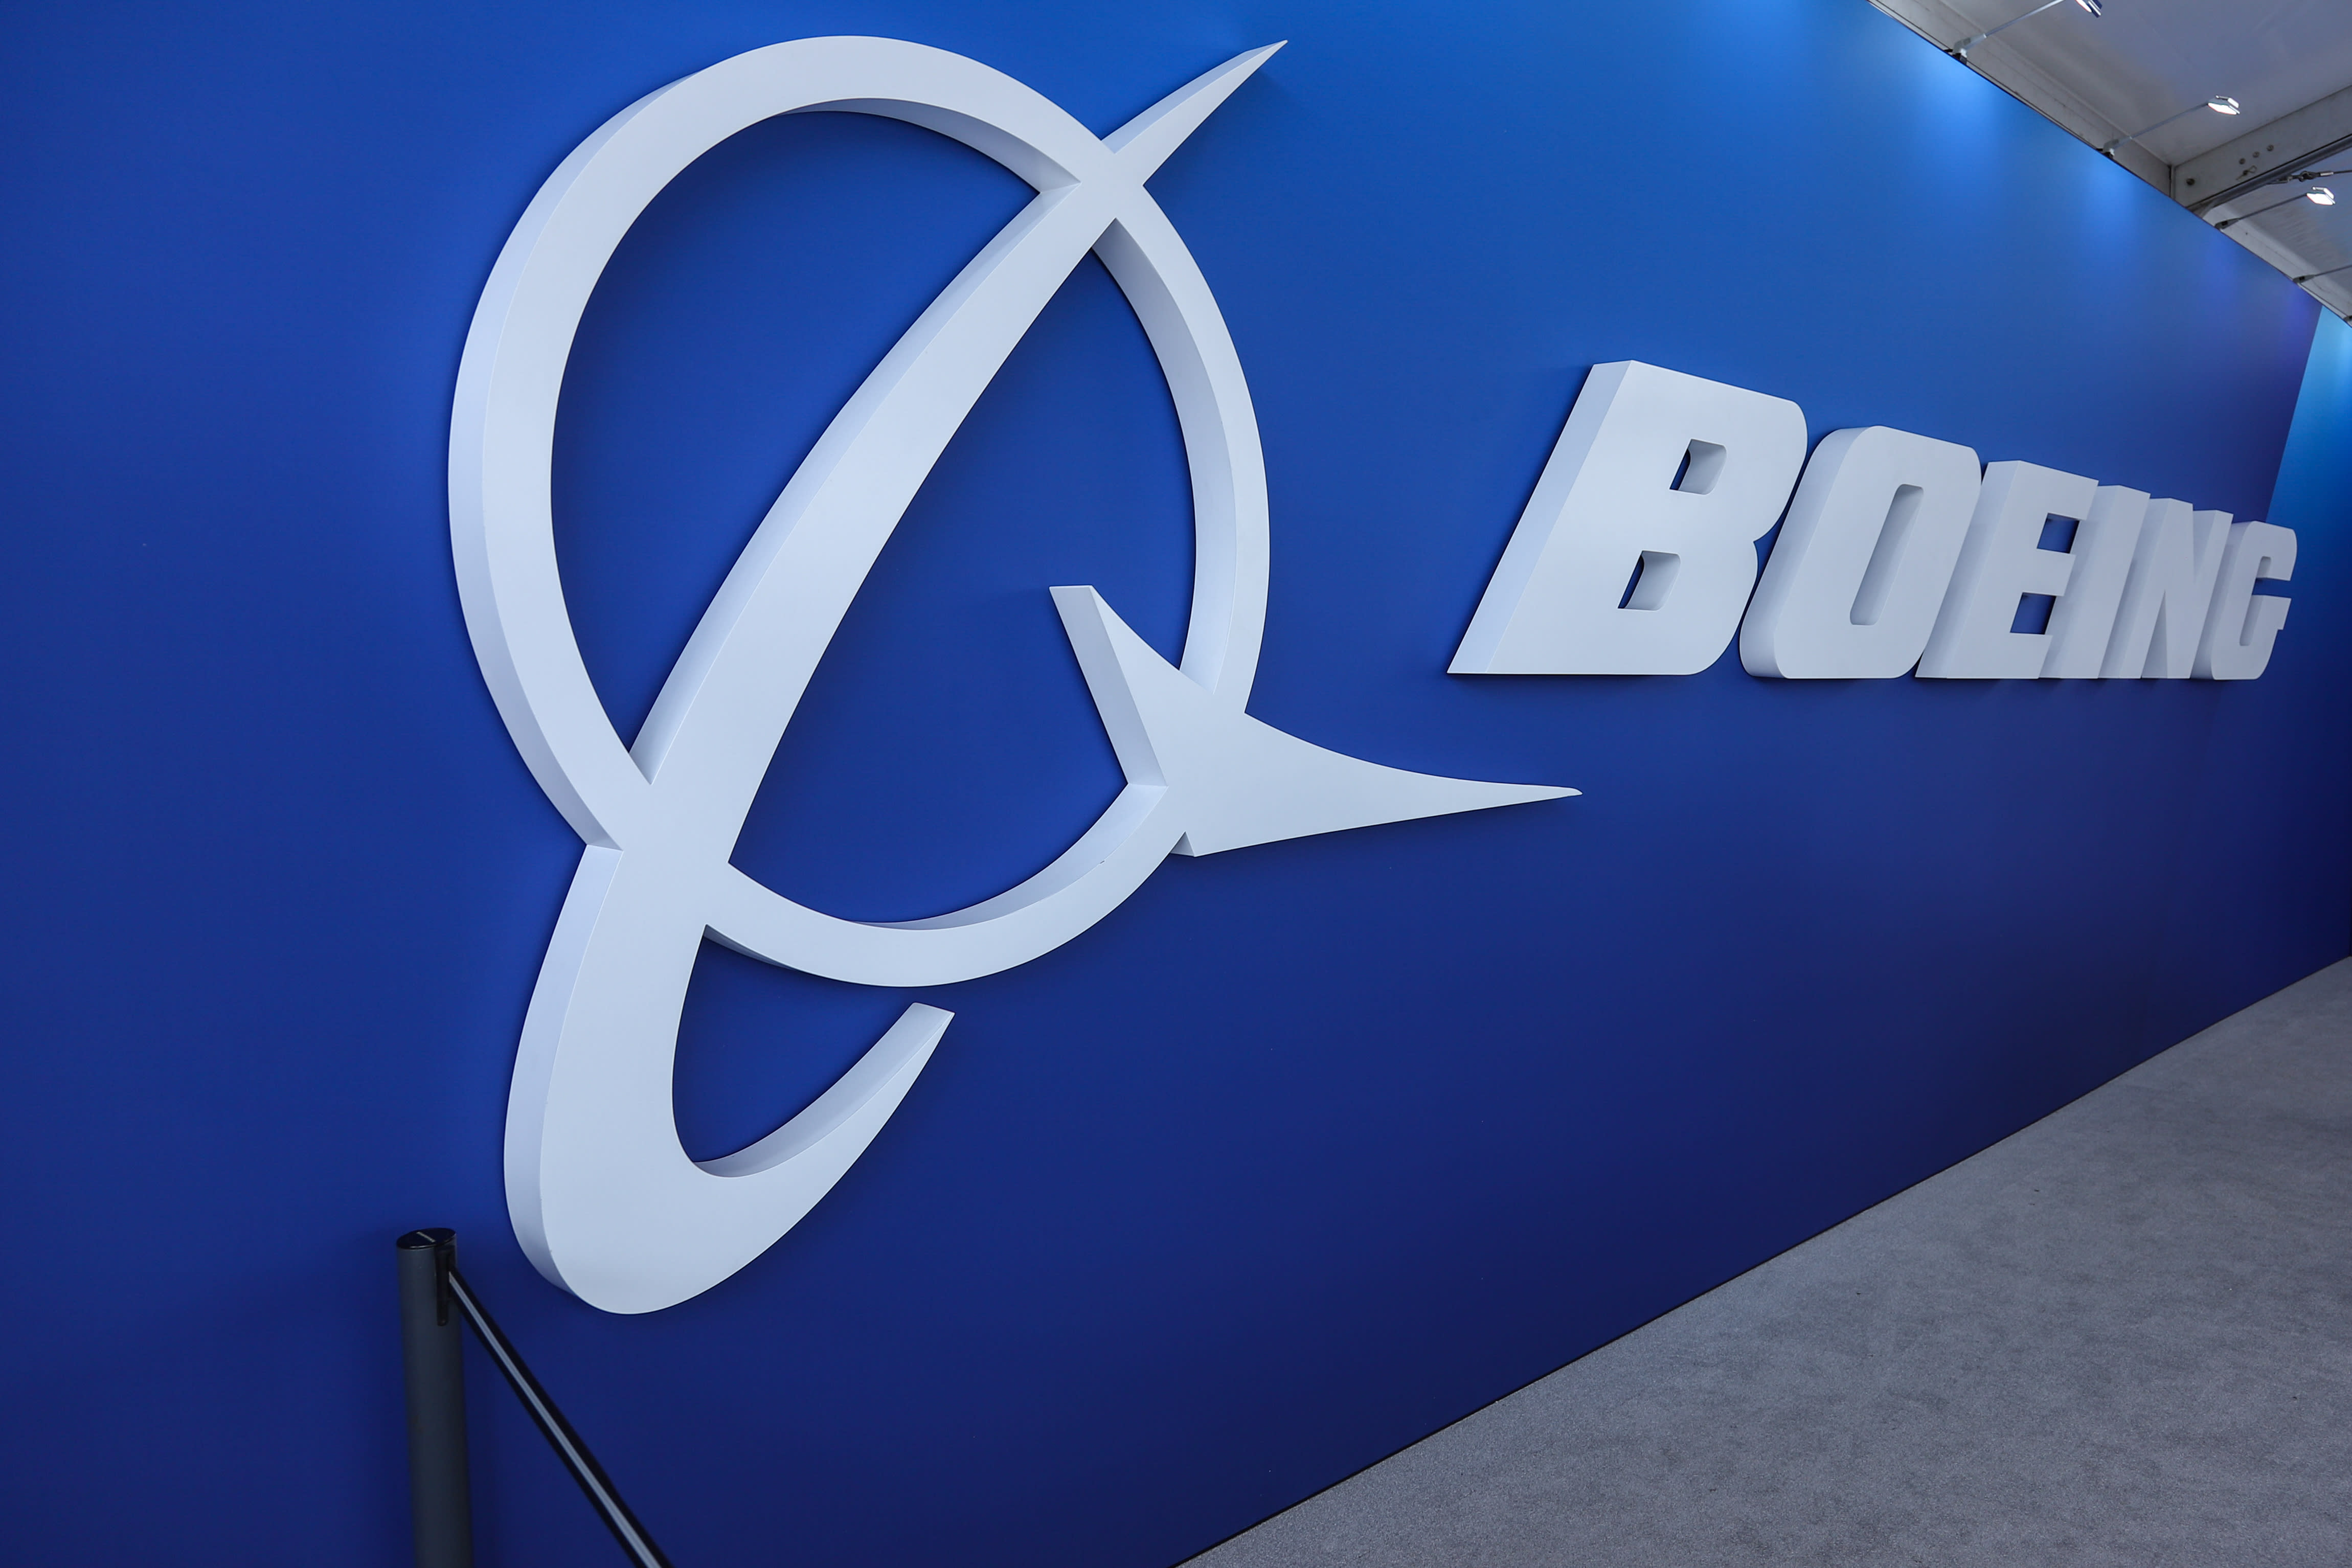 Jim Cramer sees his head in Boeing after the stock was released on 737 Max